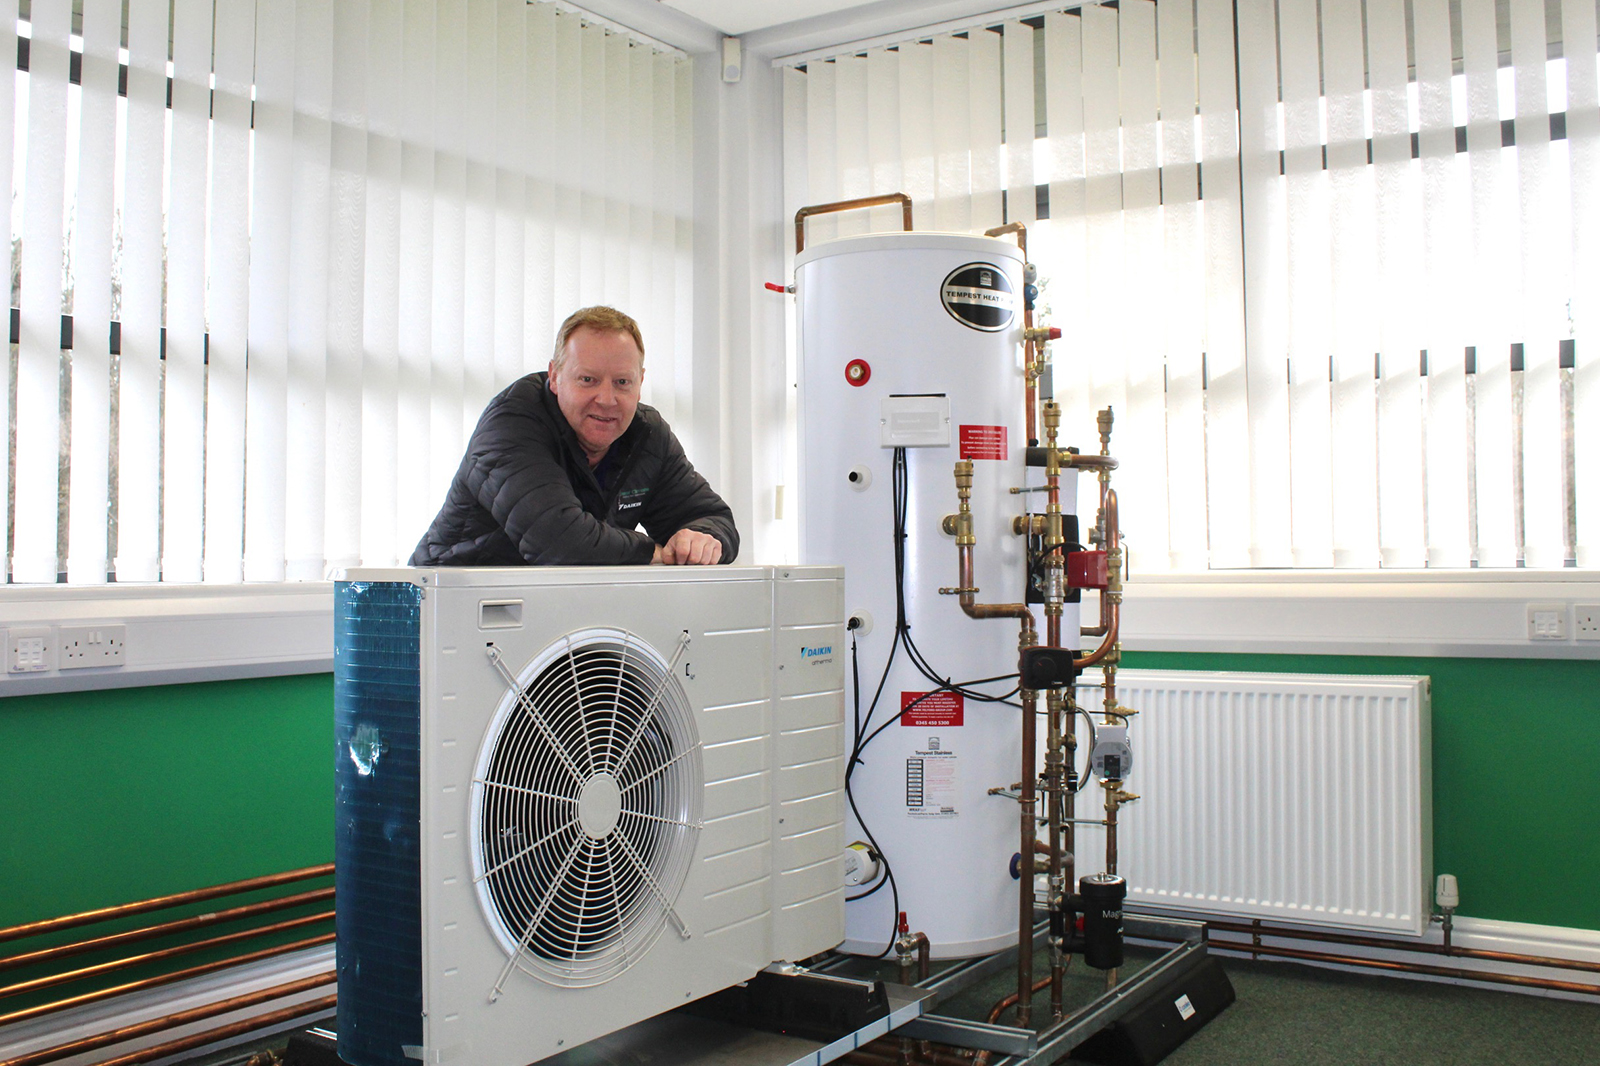 New heat pump training centre opens in the North East